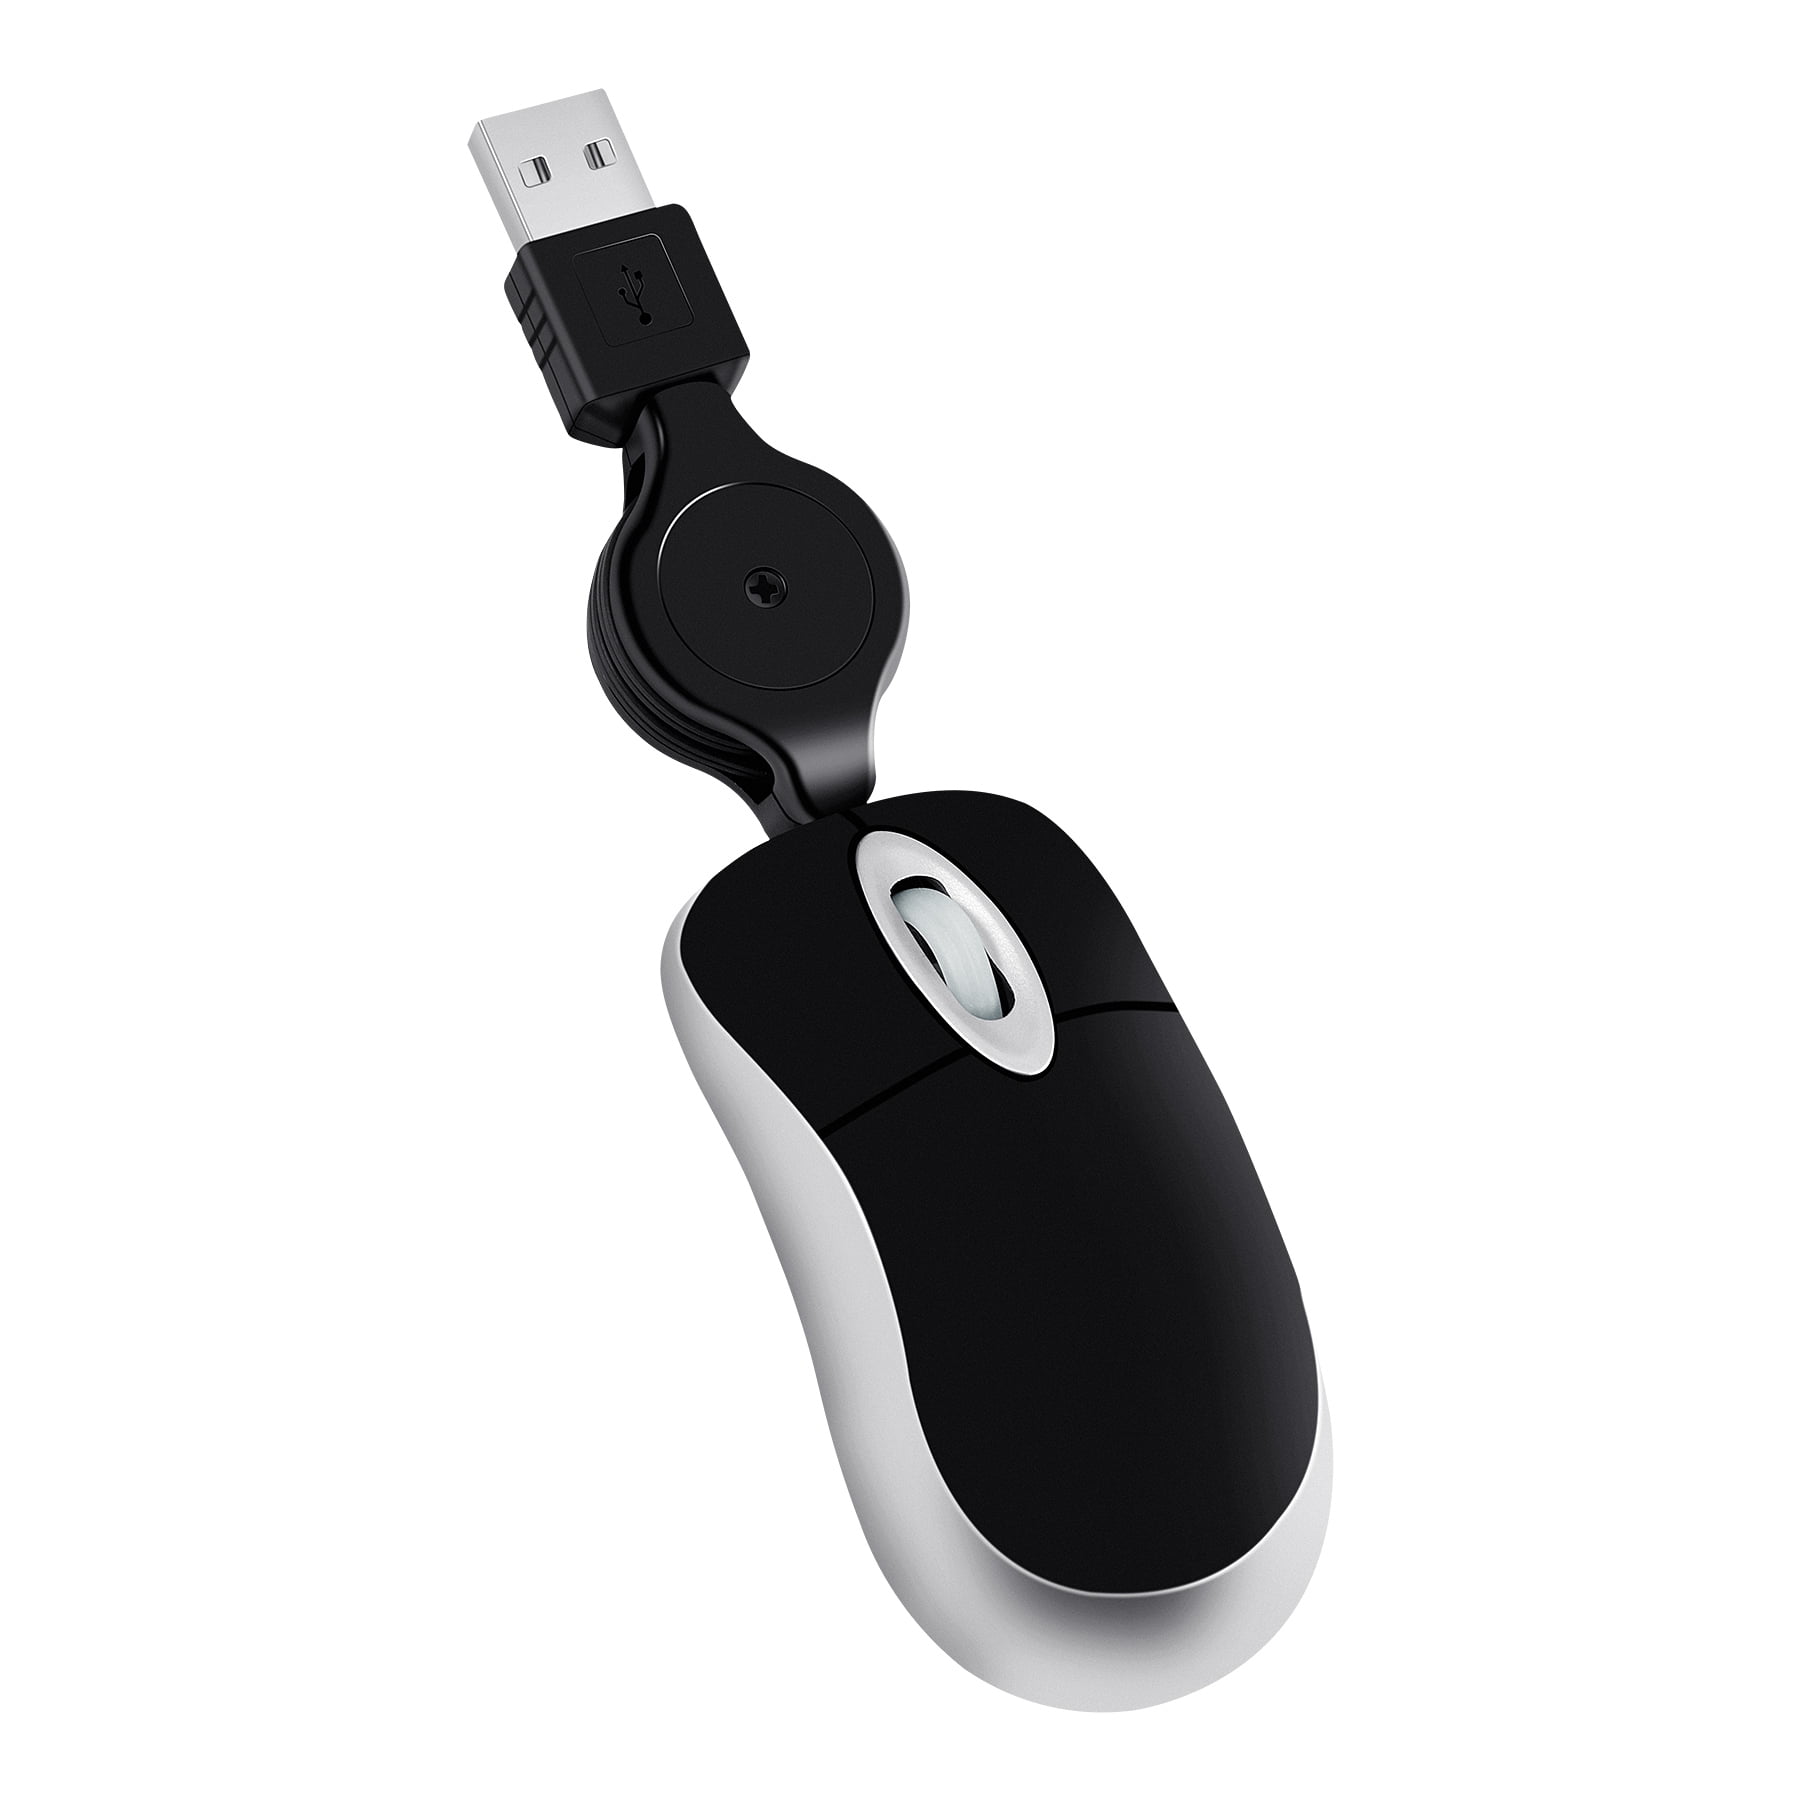 Retractable Mini Optical Wired USB Mouse for Laptops & Notebook & Computer 